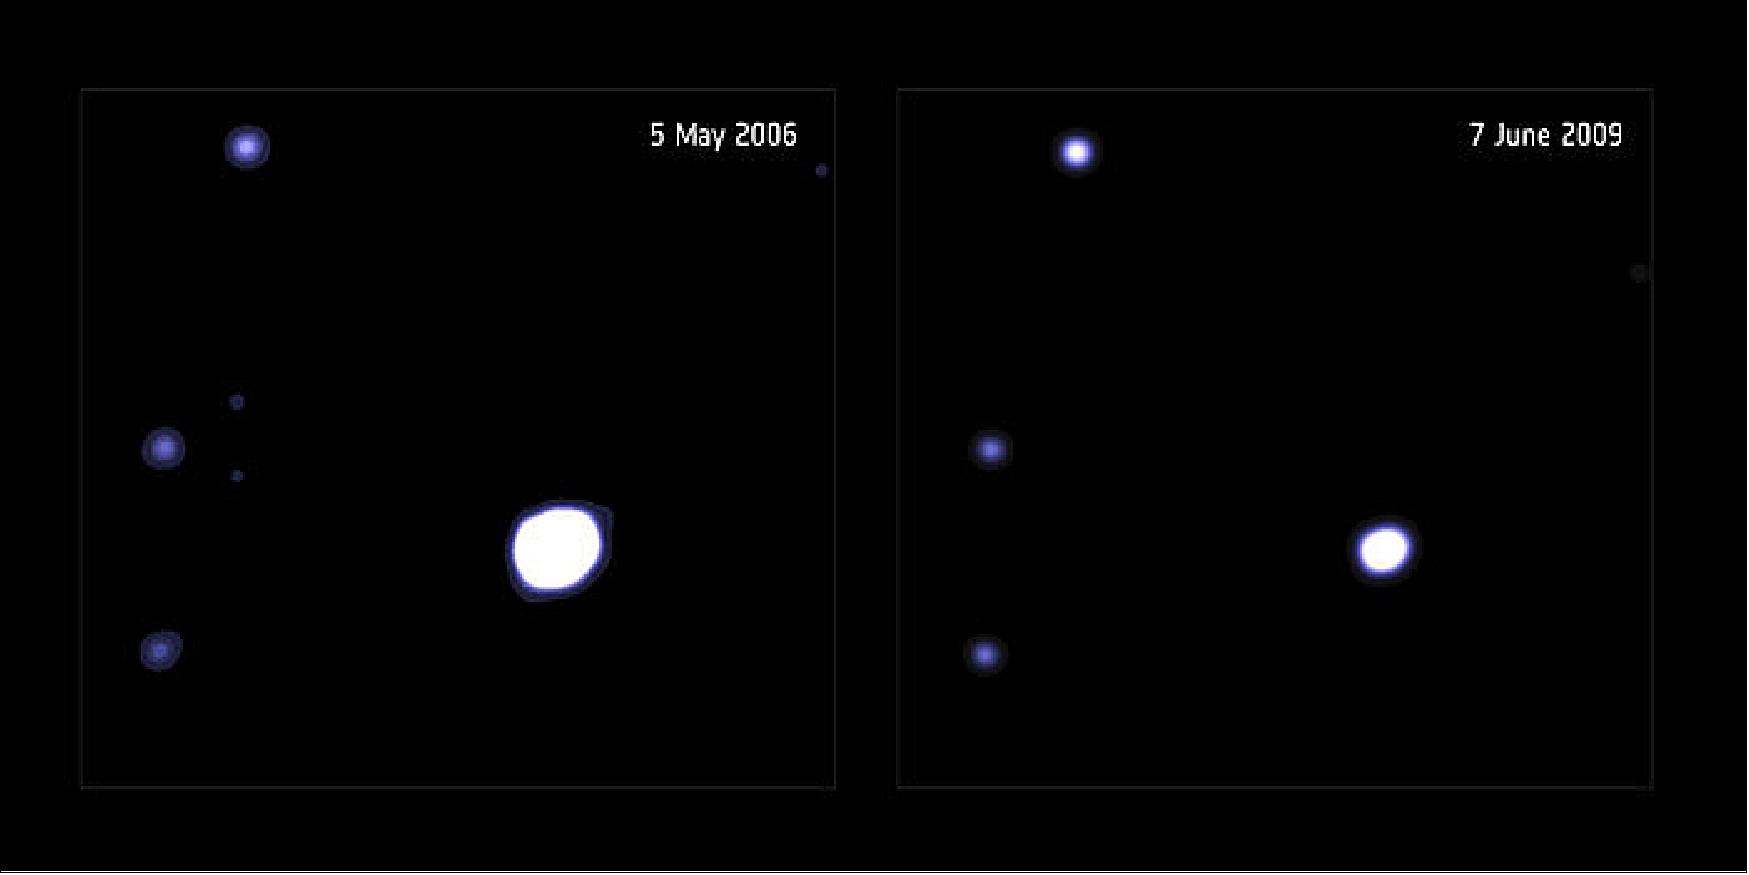 Figure 80: .XMM-Newton view of intermediate-mass black hole candidate. The X-ray source 3XMM J215022.4-055108, viewed with ESA’s XMM-Newton X-ray space observatory in 2006 (left) and 2009 (right), image credit: ESA/XMM-Newton; D. Lin et al (University of New Hampshire, USA); Acknowledgement: NASA/CXC